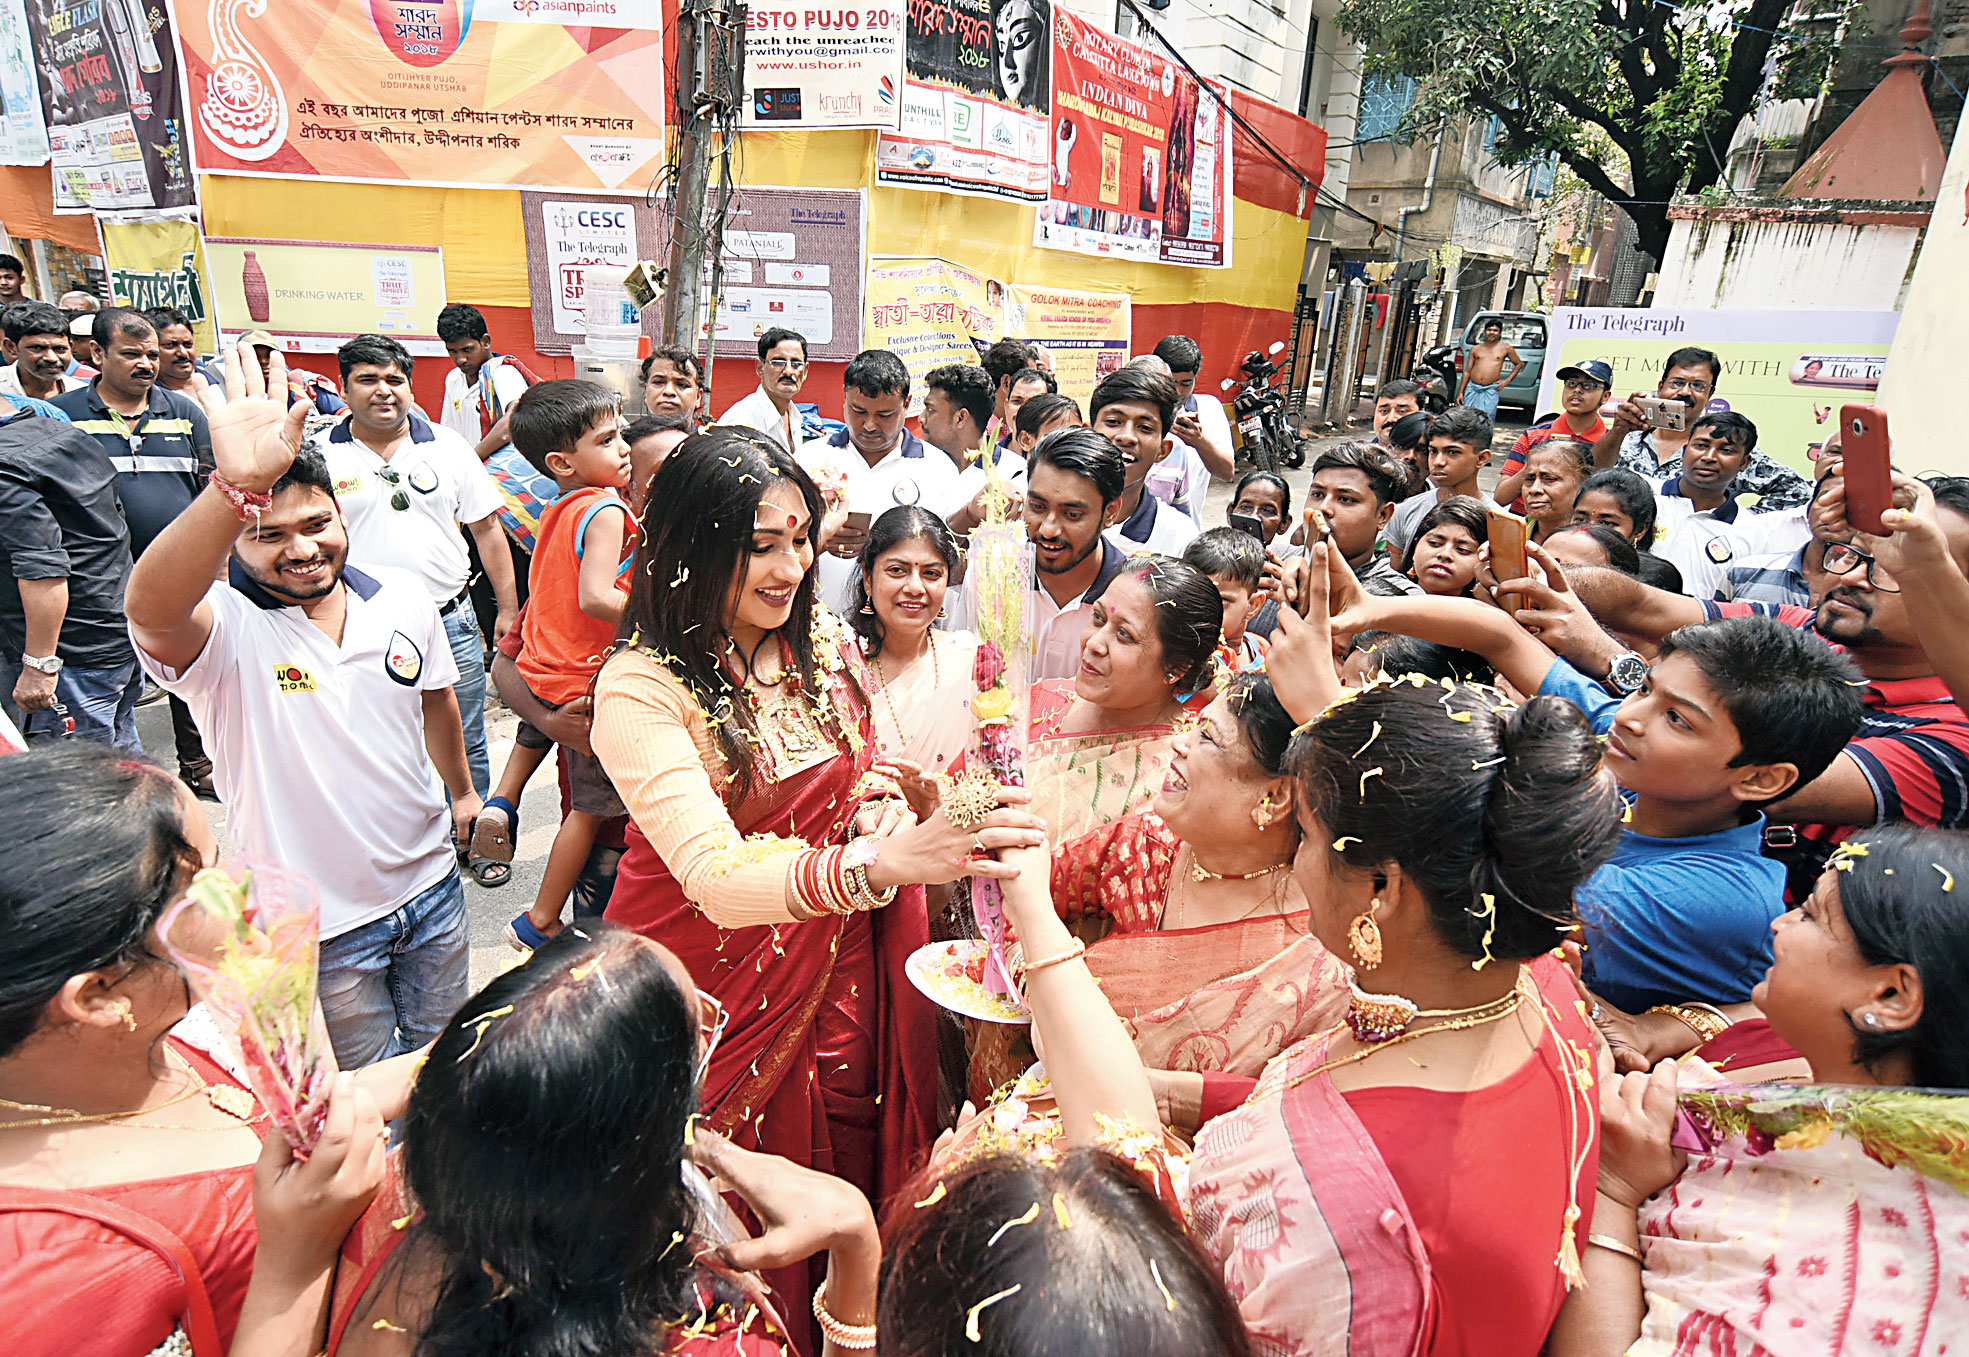 A shower of flowers and the beats of the dhaak greeted actress Rituparna Sengupta at Shyamapally Shyama Sangha, a Four Star Puja. “I loved the way the women welcomed me in a traditional way. We look forward to such moments. Their protima is beautiful. I liked the way they have given wings to the lion,” she said